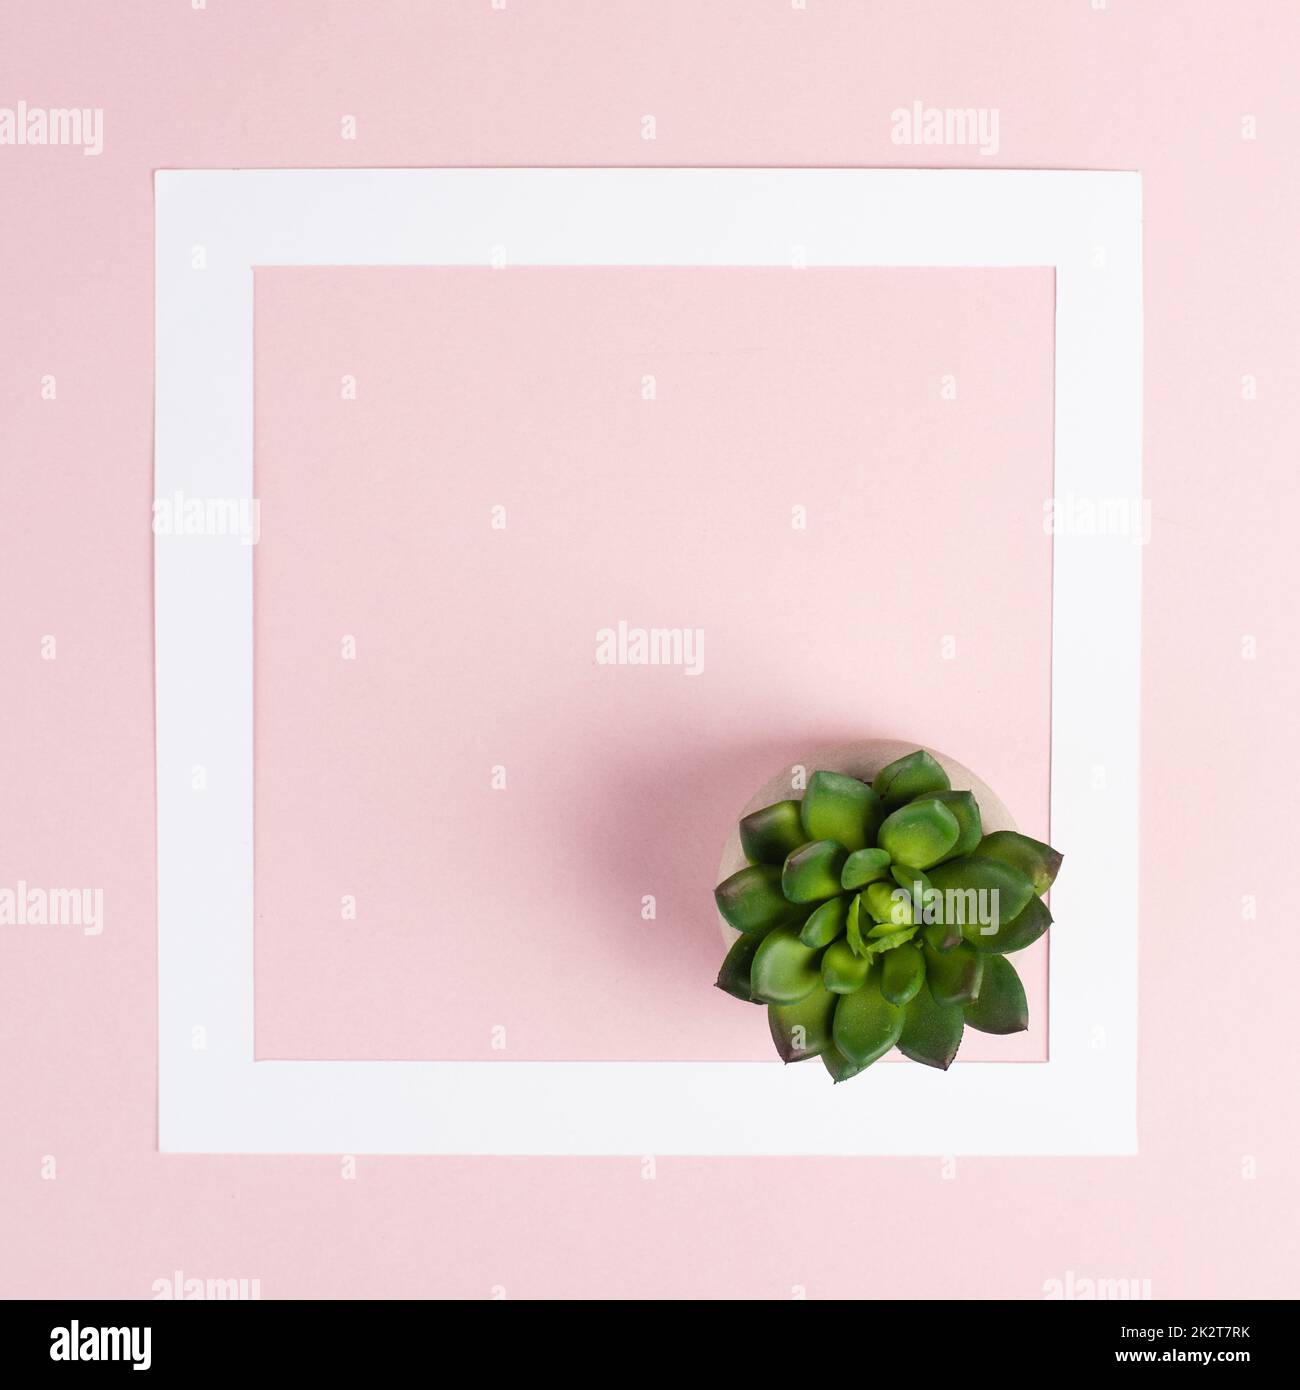 Rose pastel colored background with a white frame and a cactus, copy space layout, text box in minimalism style, greeting card Stock Photo